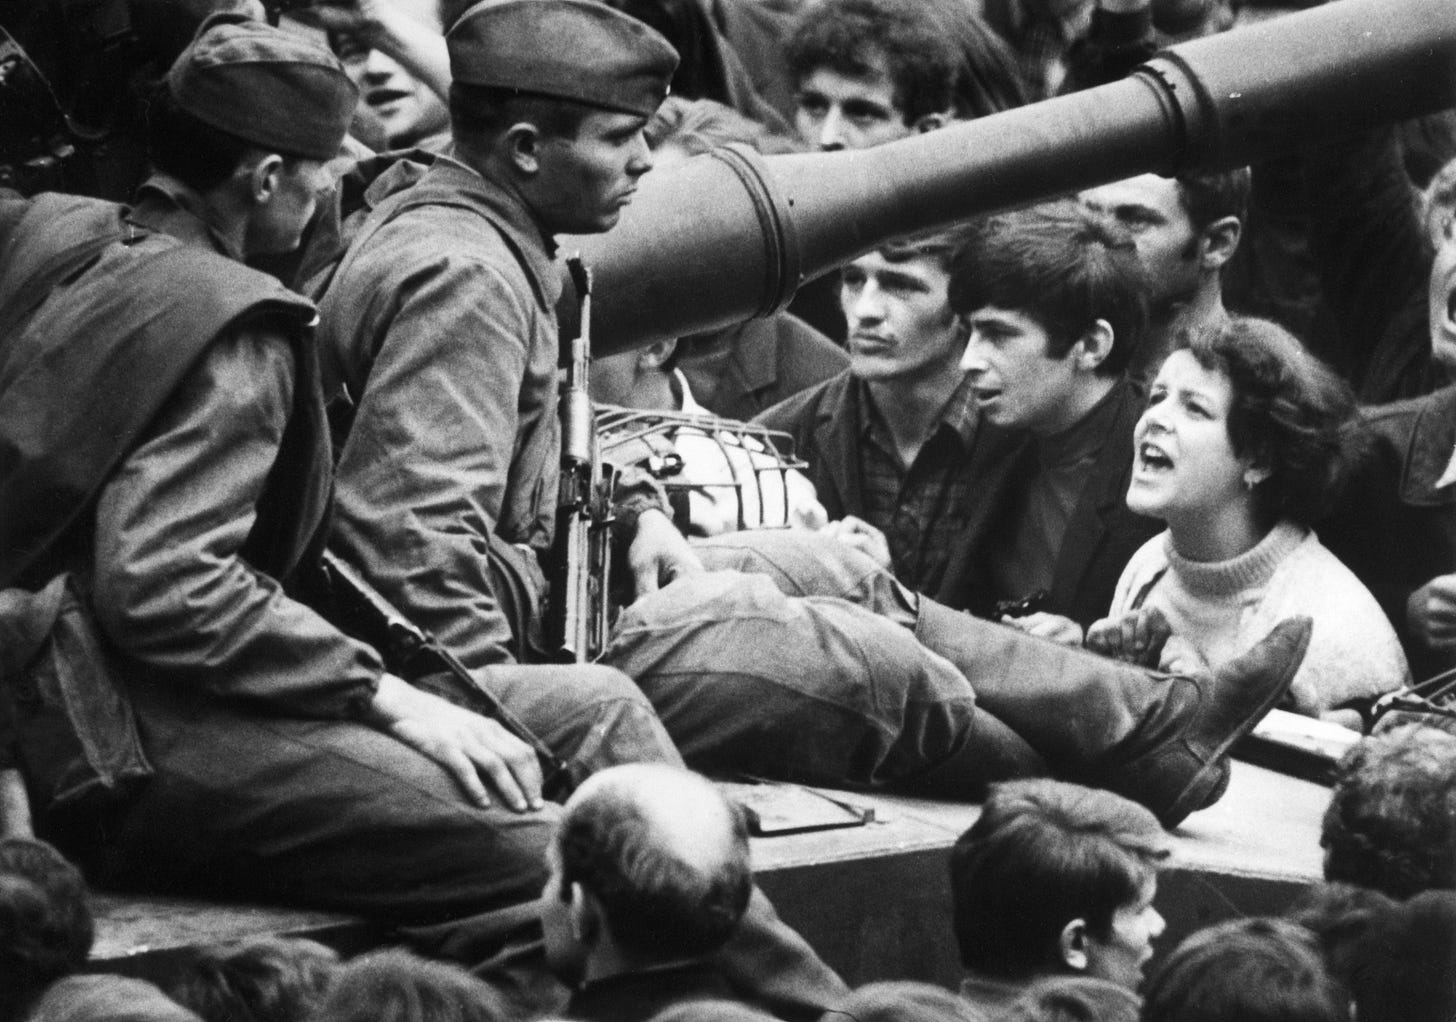 Opinion: I was 17 when Soviet tanks rolled into Prague -- and watch in  horror now | CNN